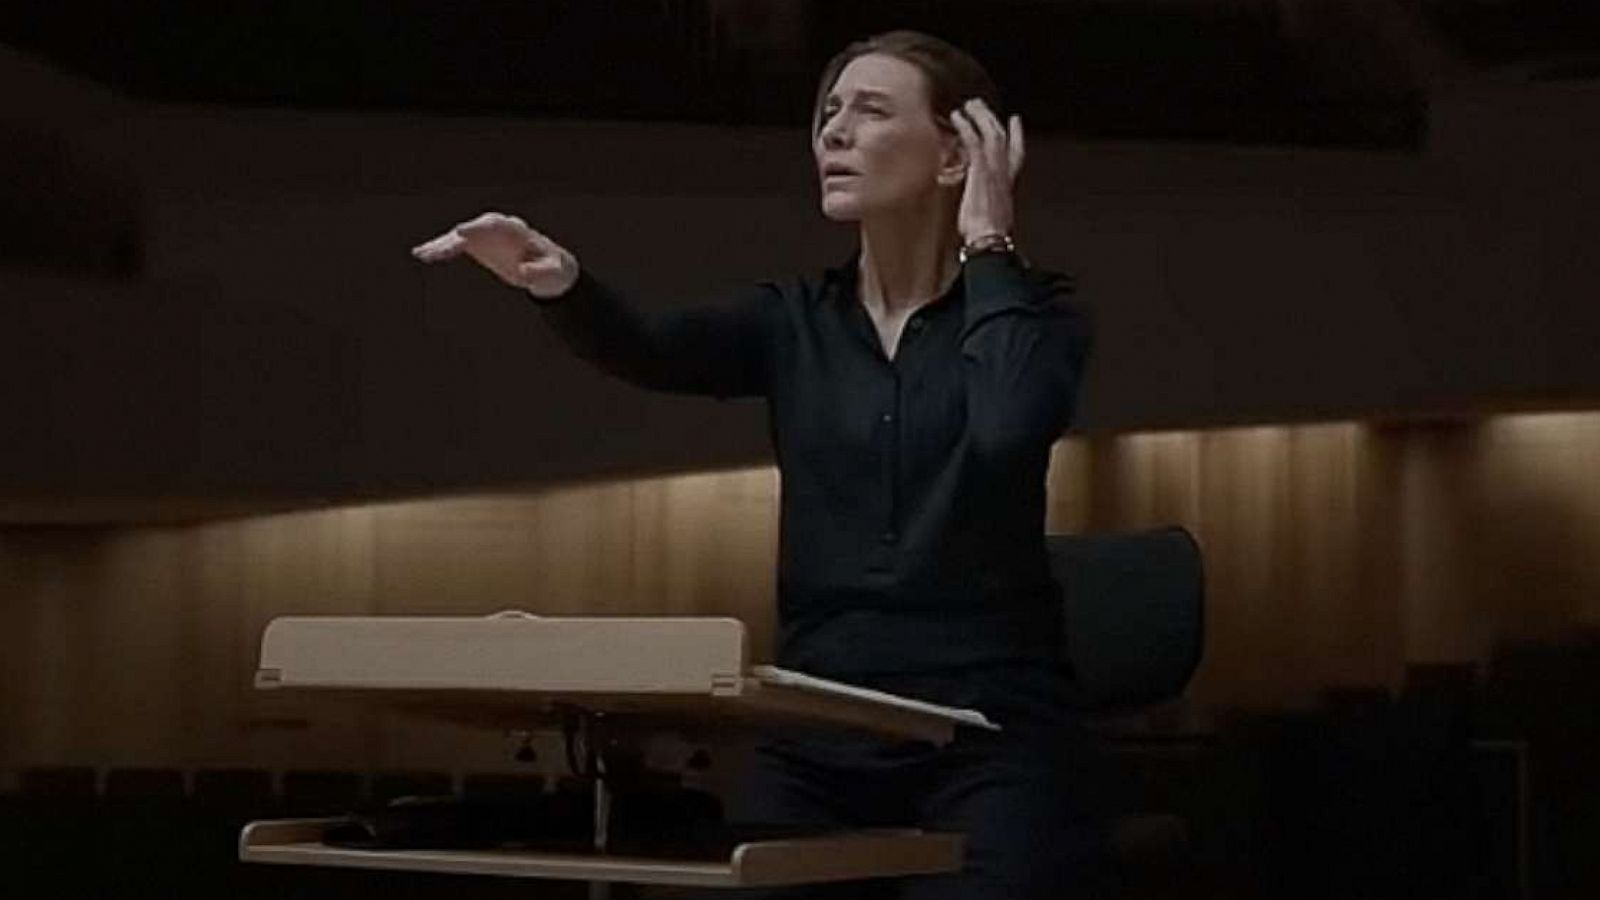 Cate Blanchett gestures with precision and intent in a still from TAR.